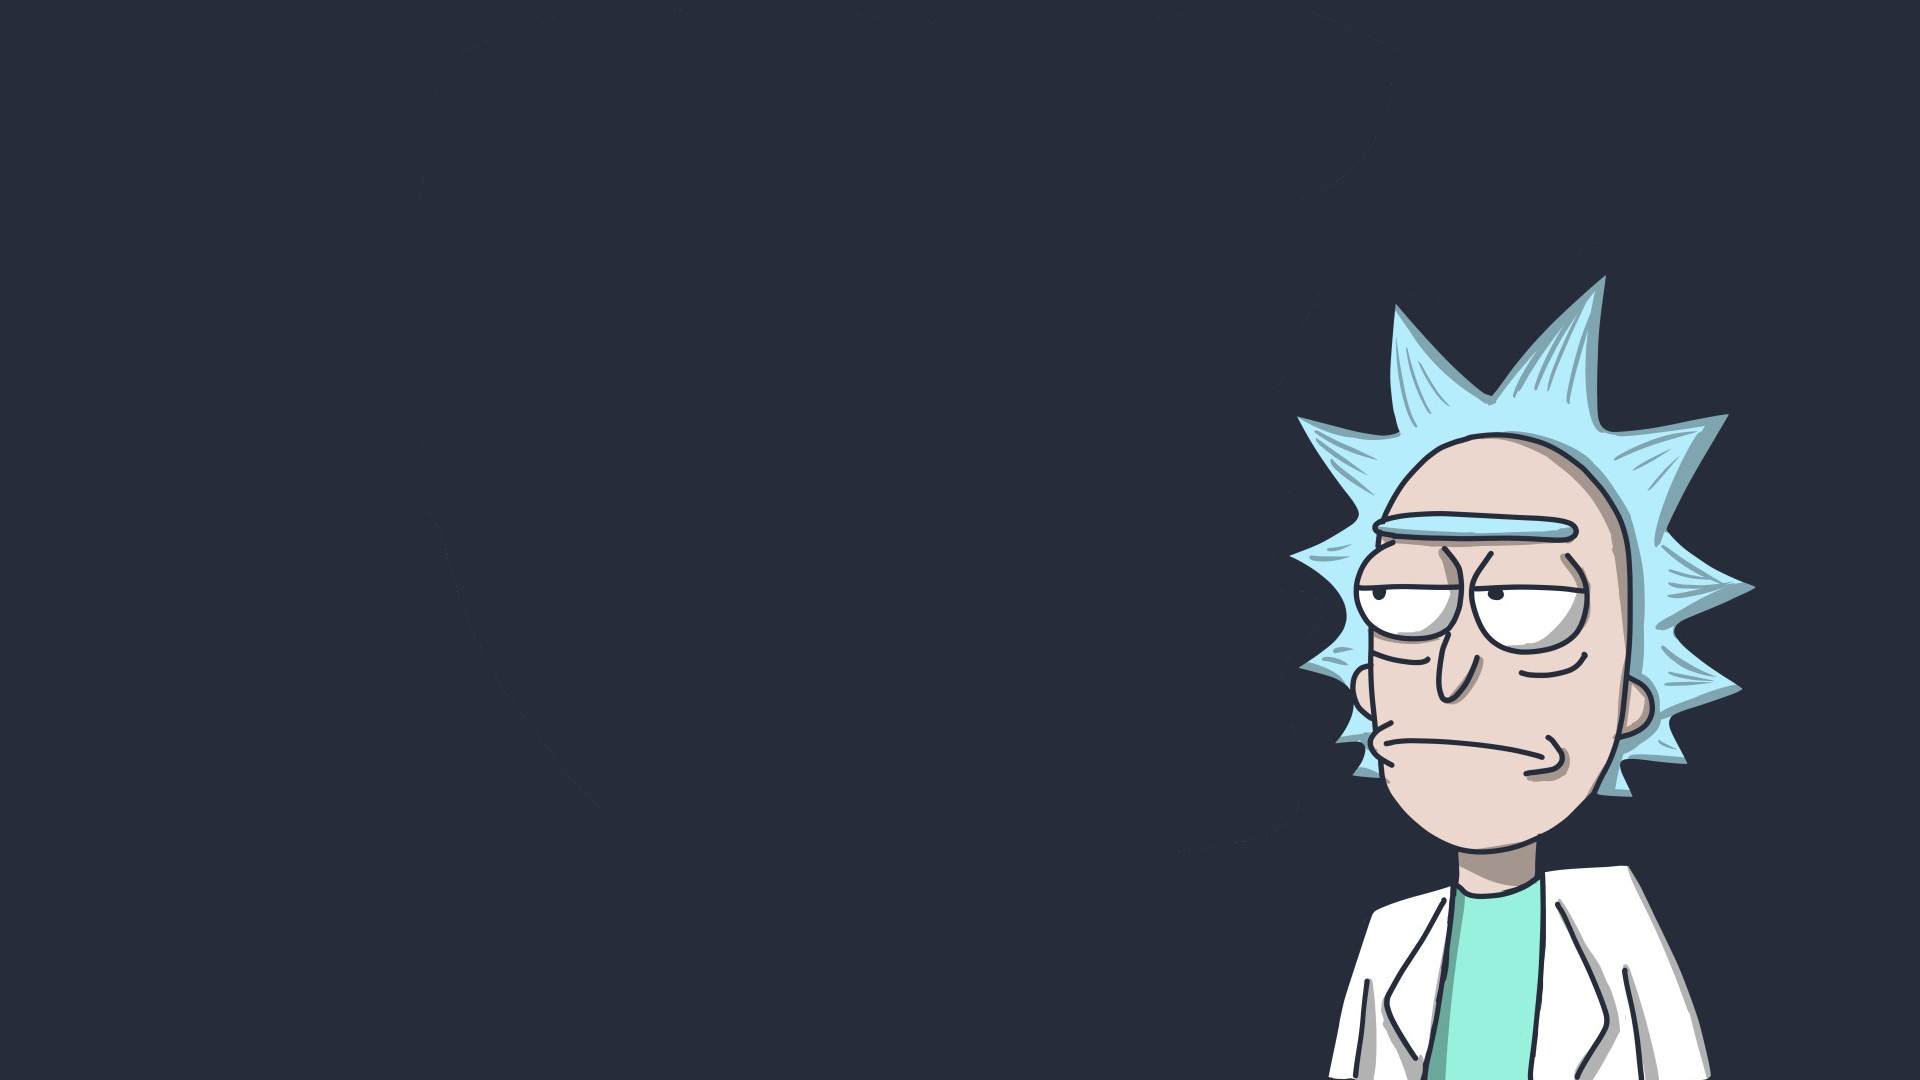 Computer Wallpapers Rick and Morty Rick with resolution 1920X1080 pixel. You can use this wallpaper as background for your desktop Computer Screensavers, Android or iPhone smartphones